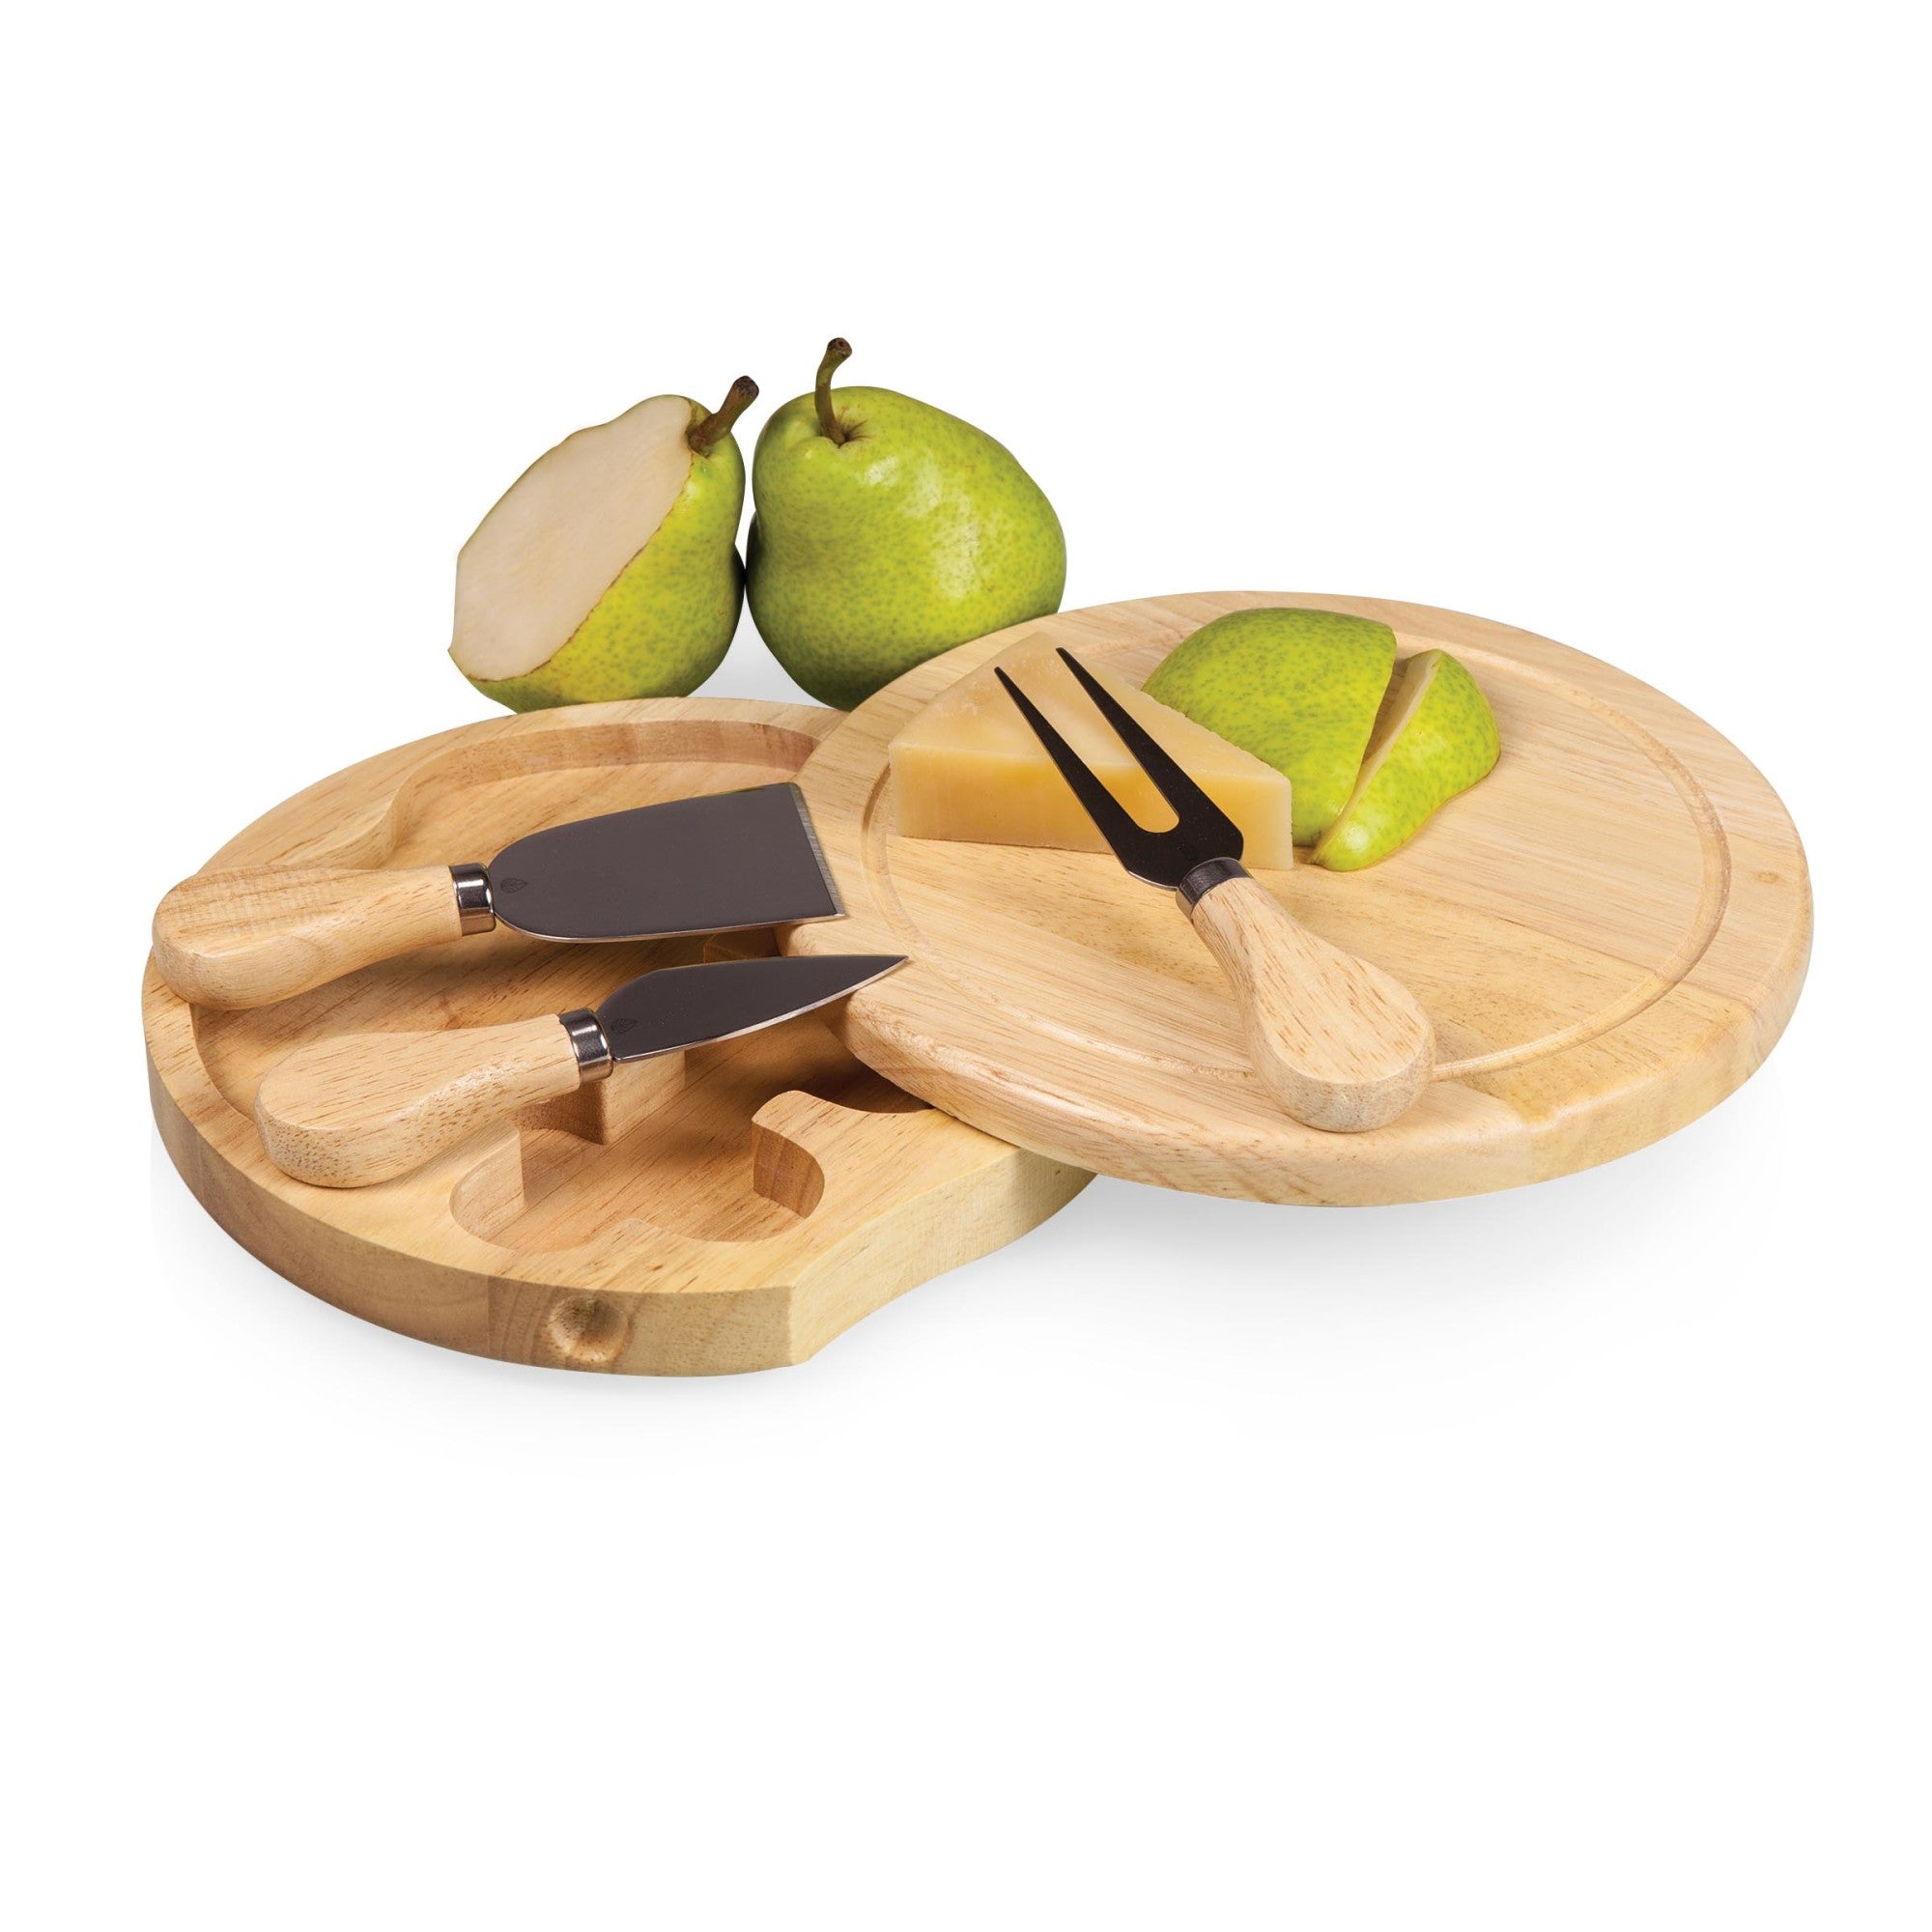 Detroit Lions - Brie Cheese Cutting Board & Tools Set